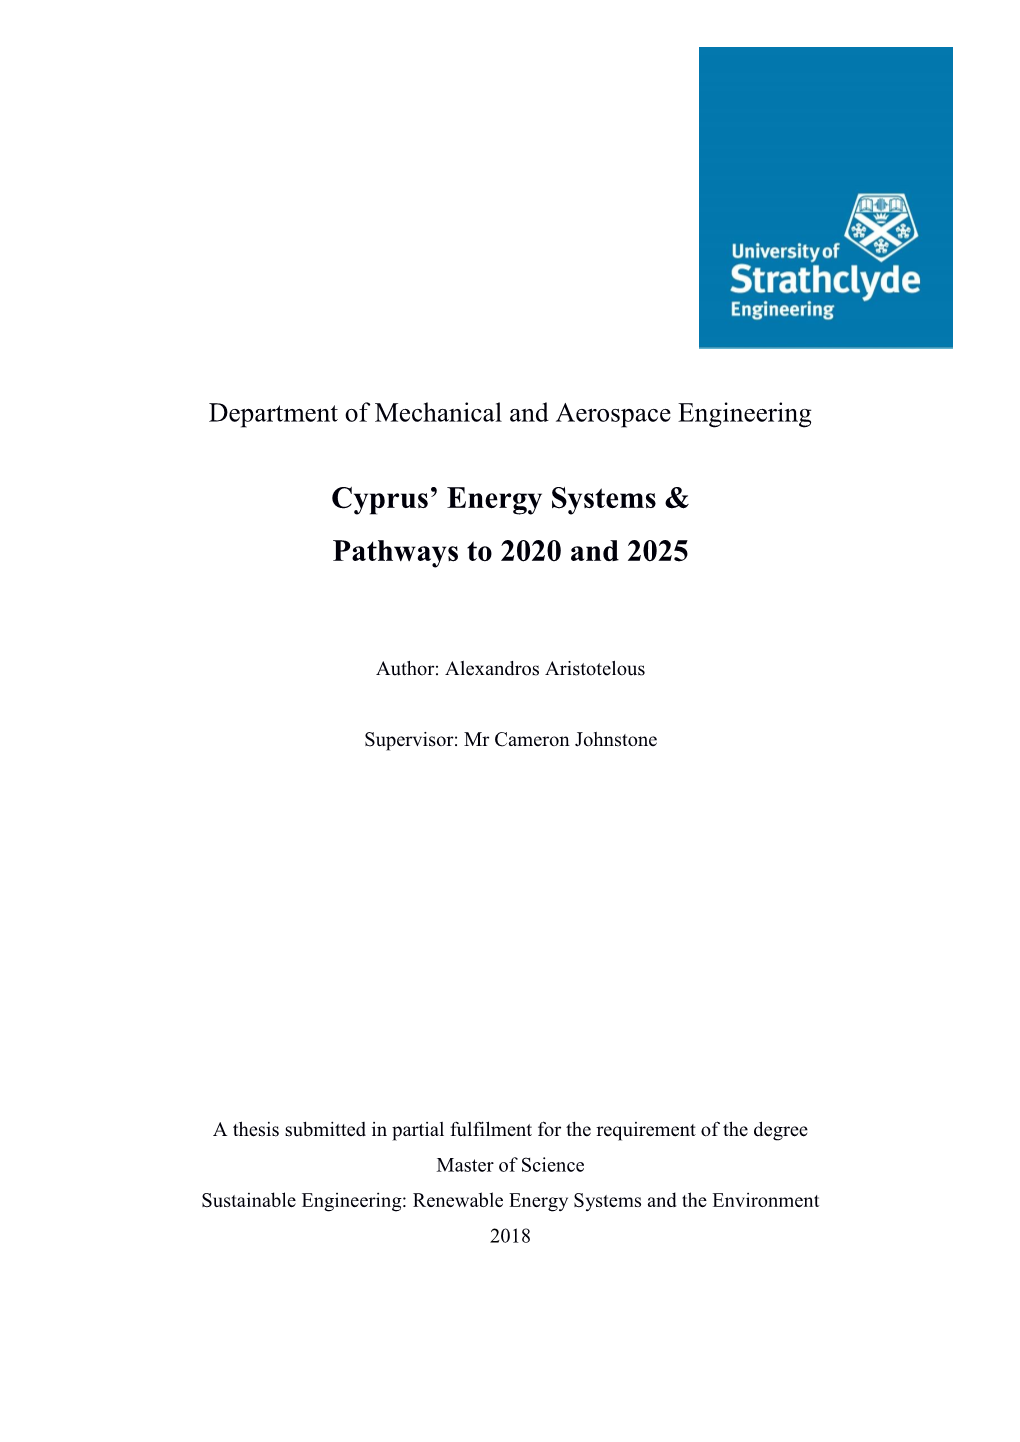 Cyprus' Energy Systems & Pathways to 2020 and 2025